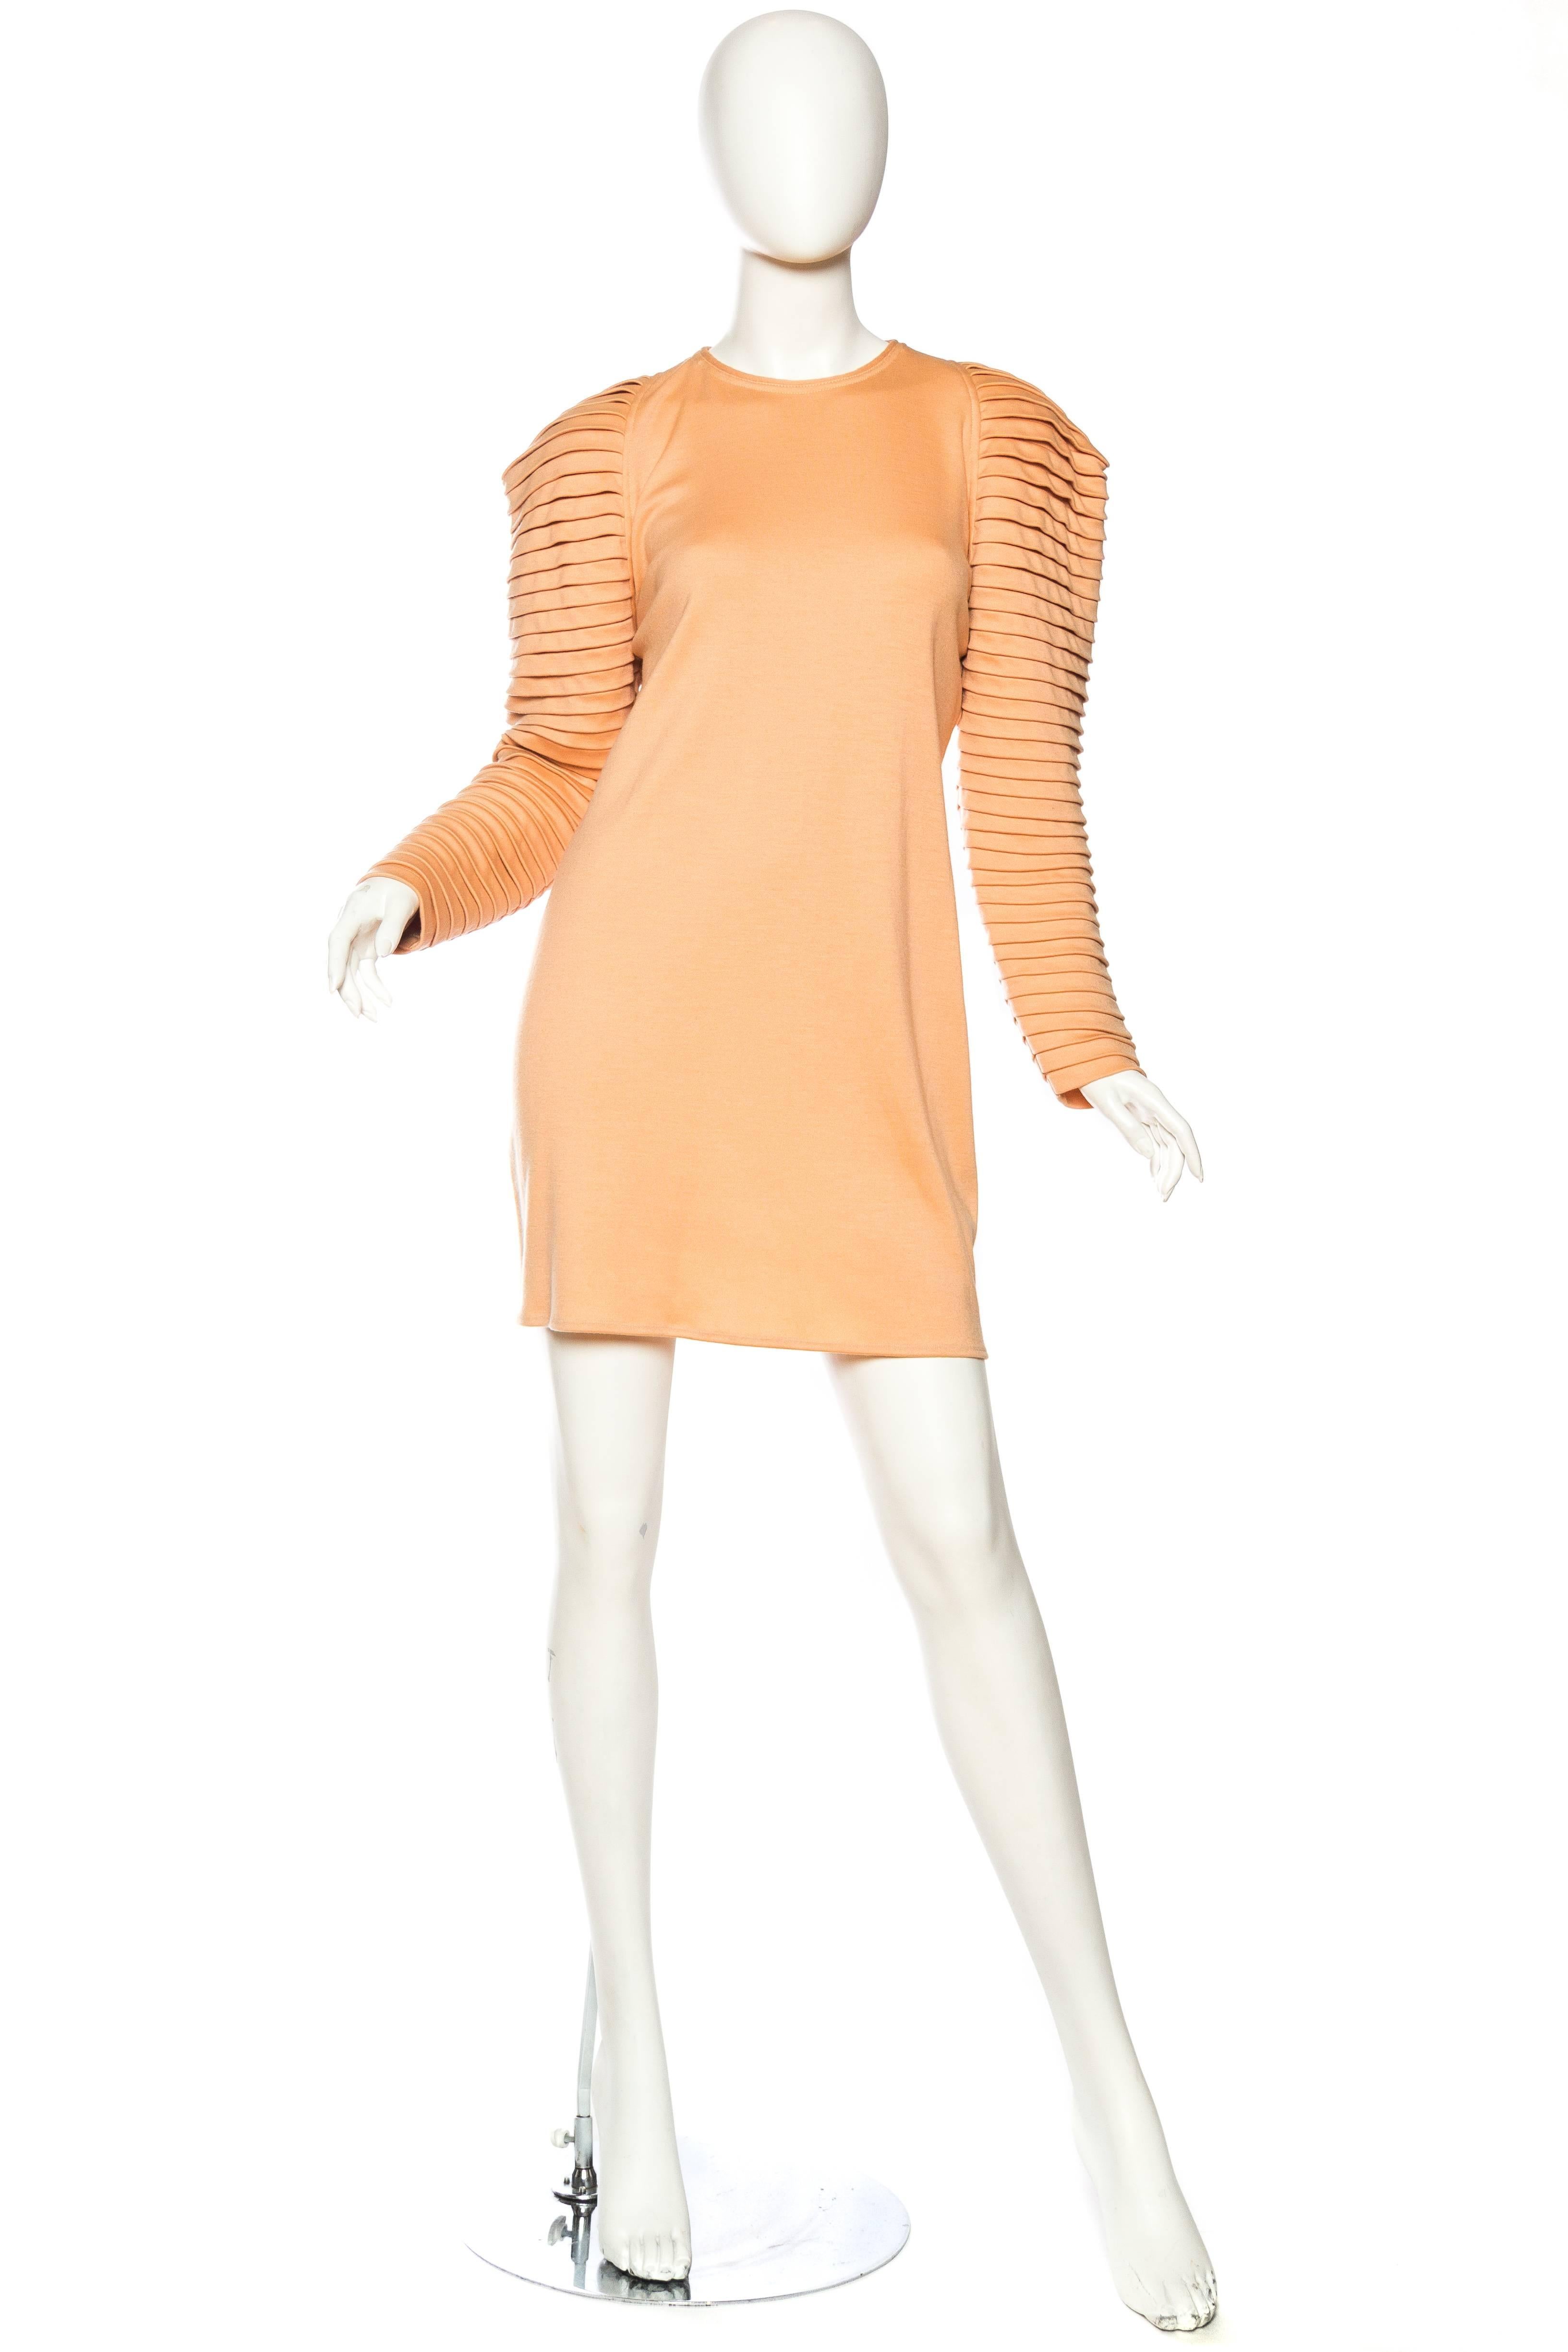 This dress dates from Gianni's early years when he was designer of the brand Genny as well as his own label. This dress is made of a wool jersey which has been cut sharp and straight away from the body with pleated sleeves creating a strong yet soft